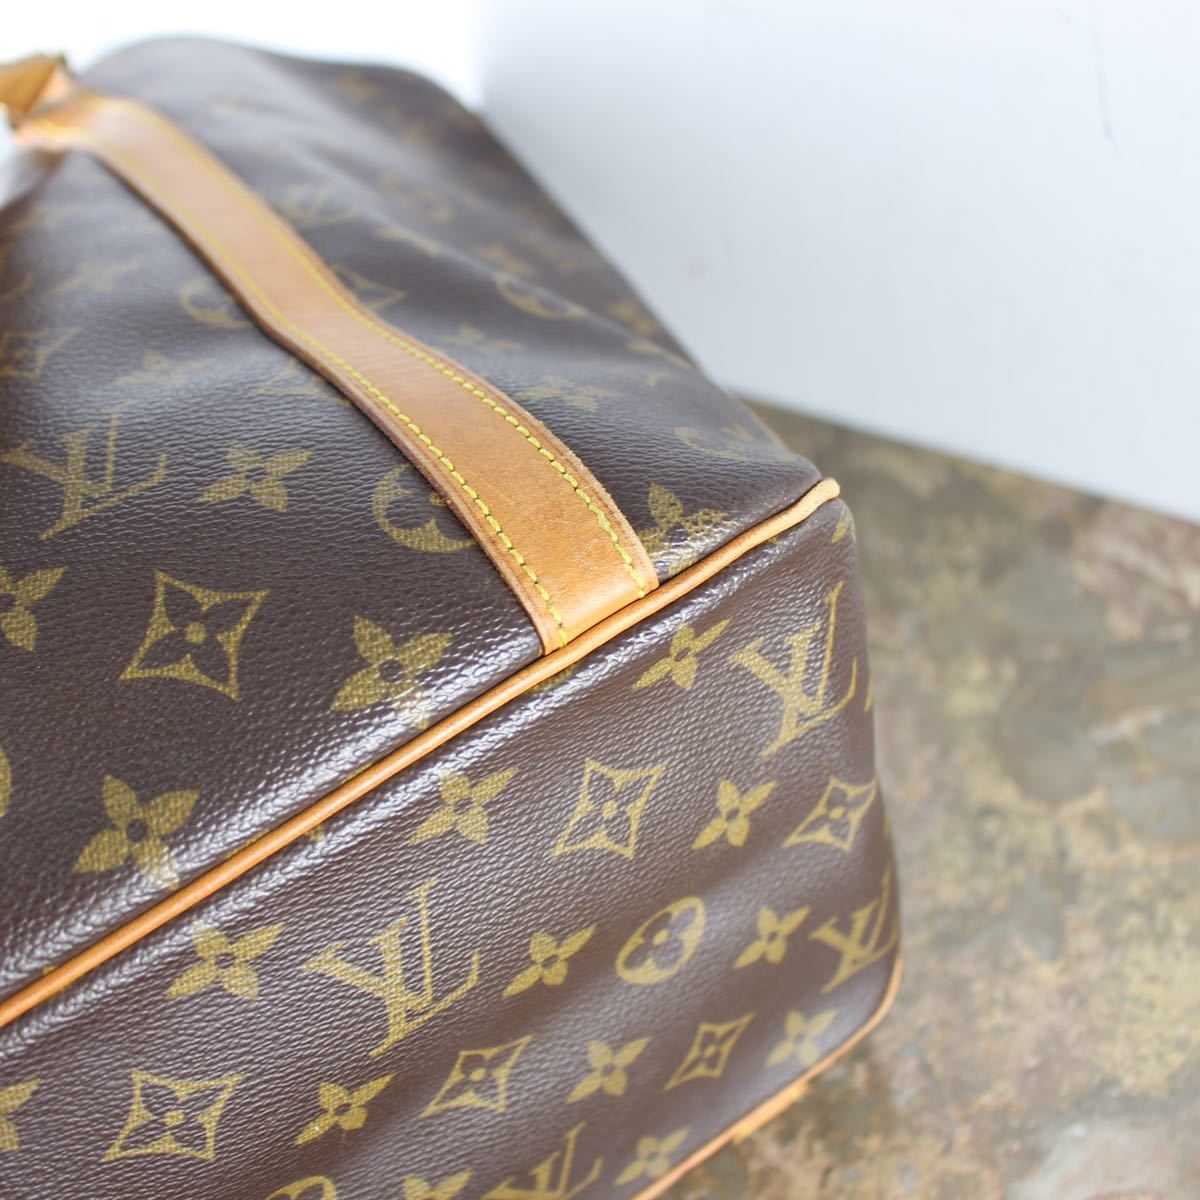 LOUIS VUITTON M51108 MB0011 MONOGRAM PATTERNED TOTE BAG MADE IN